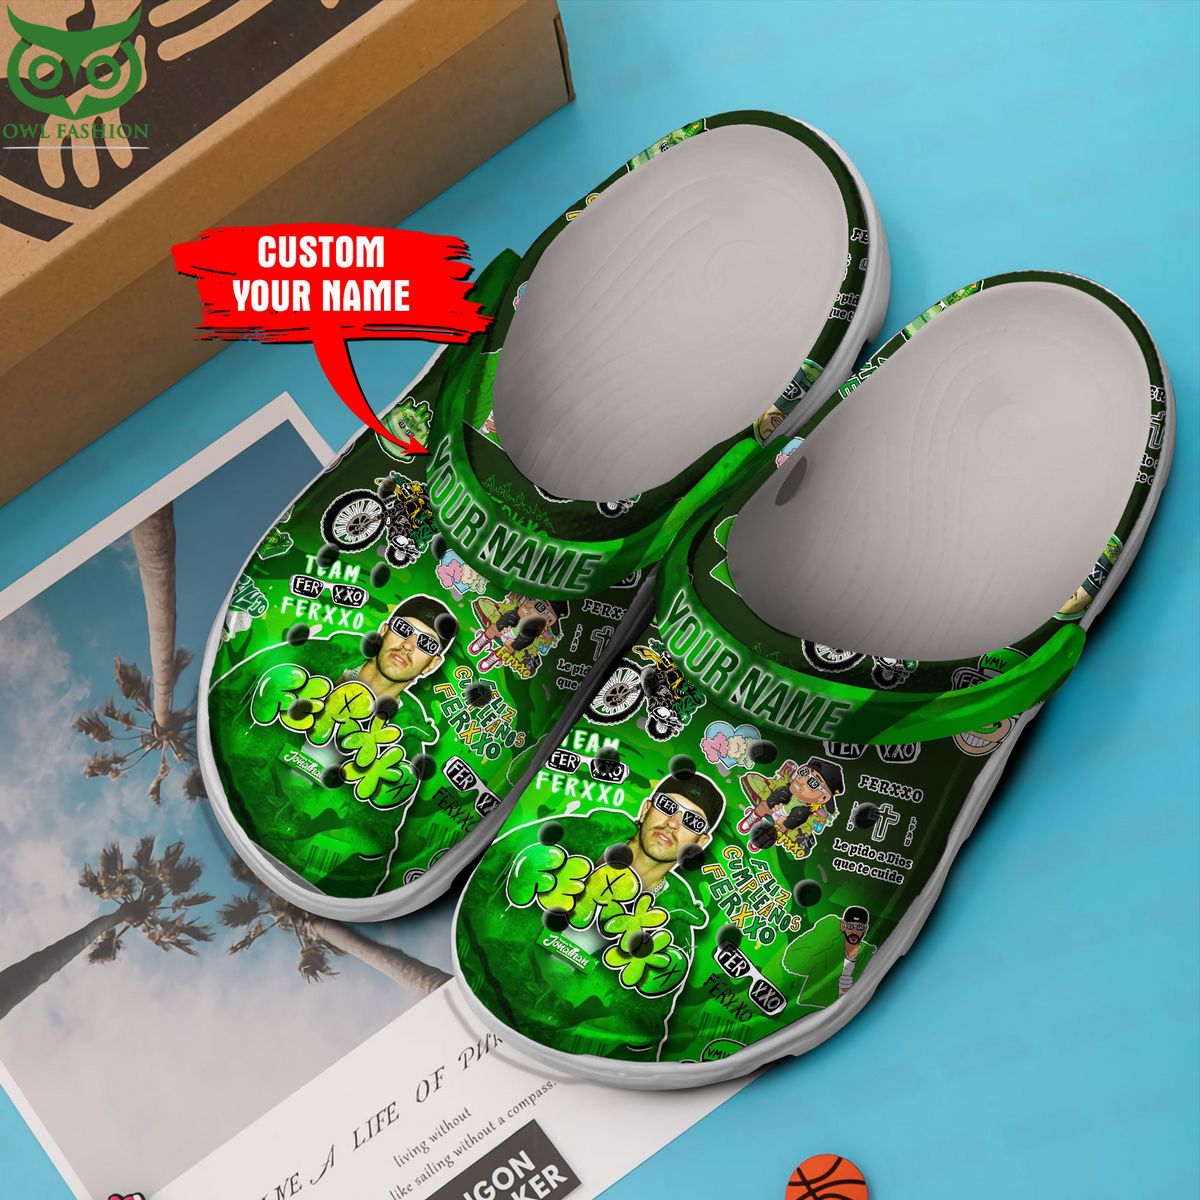 Custom Name Ferxxo Singer Green Clogs How did you learn to click so well